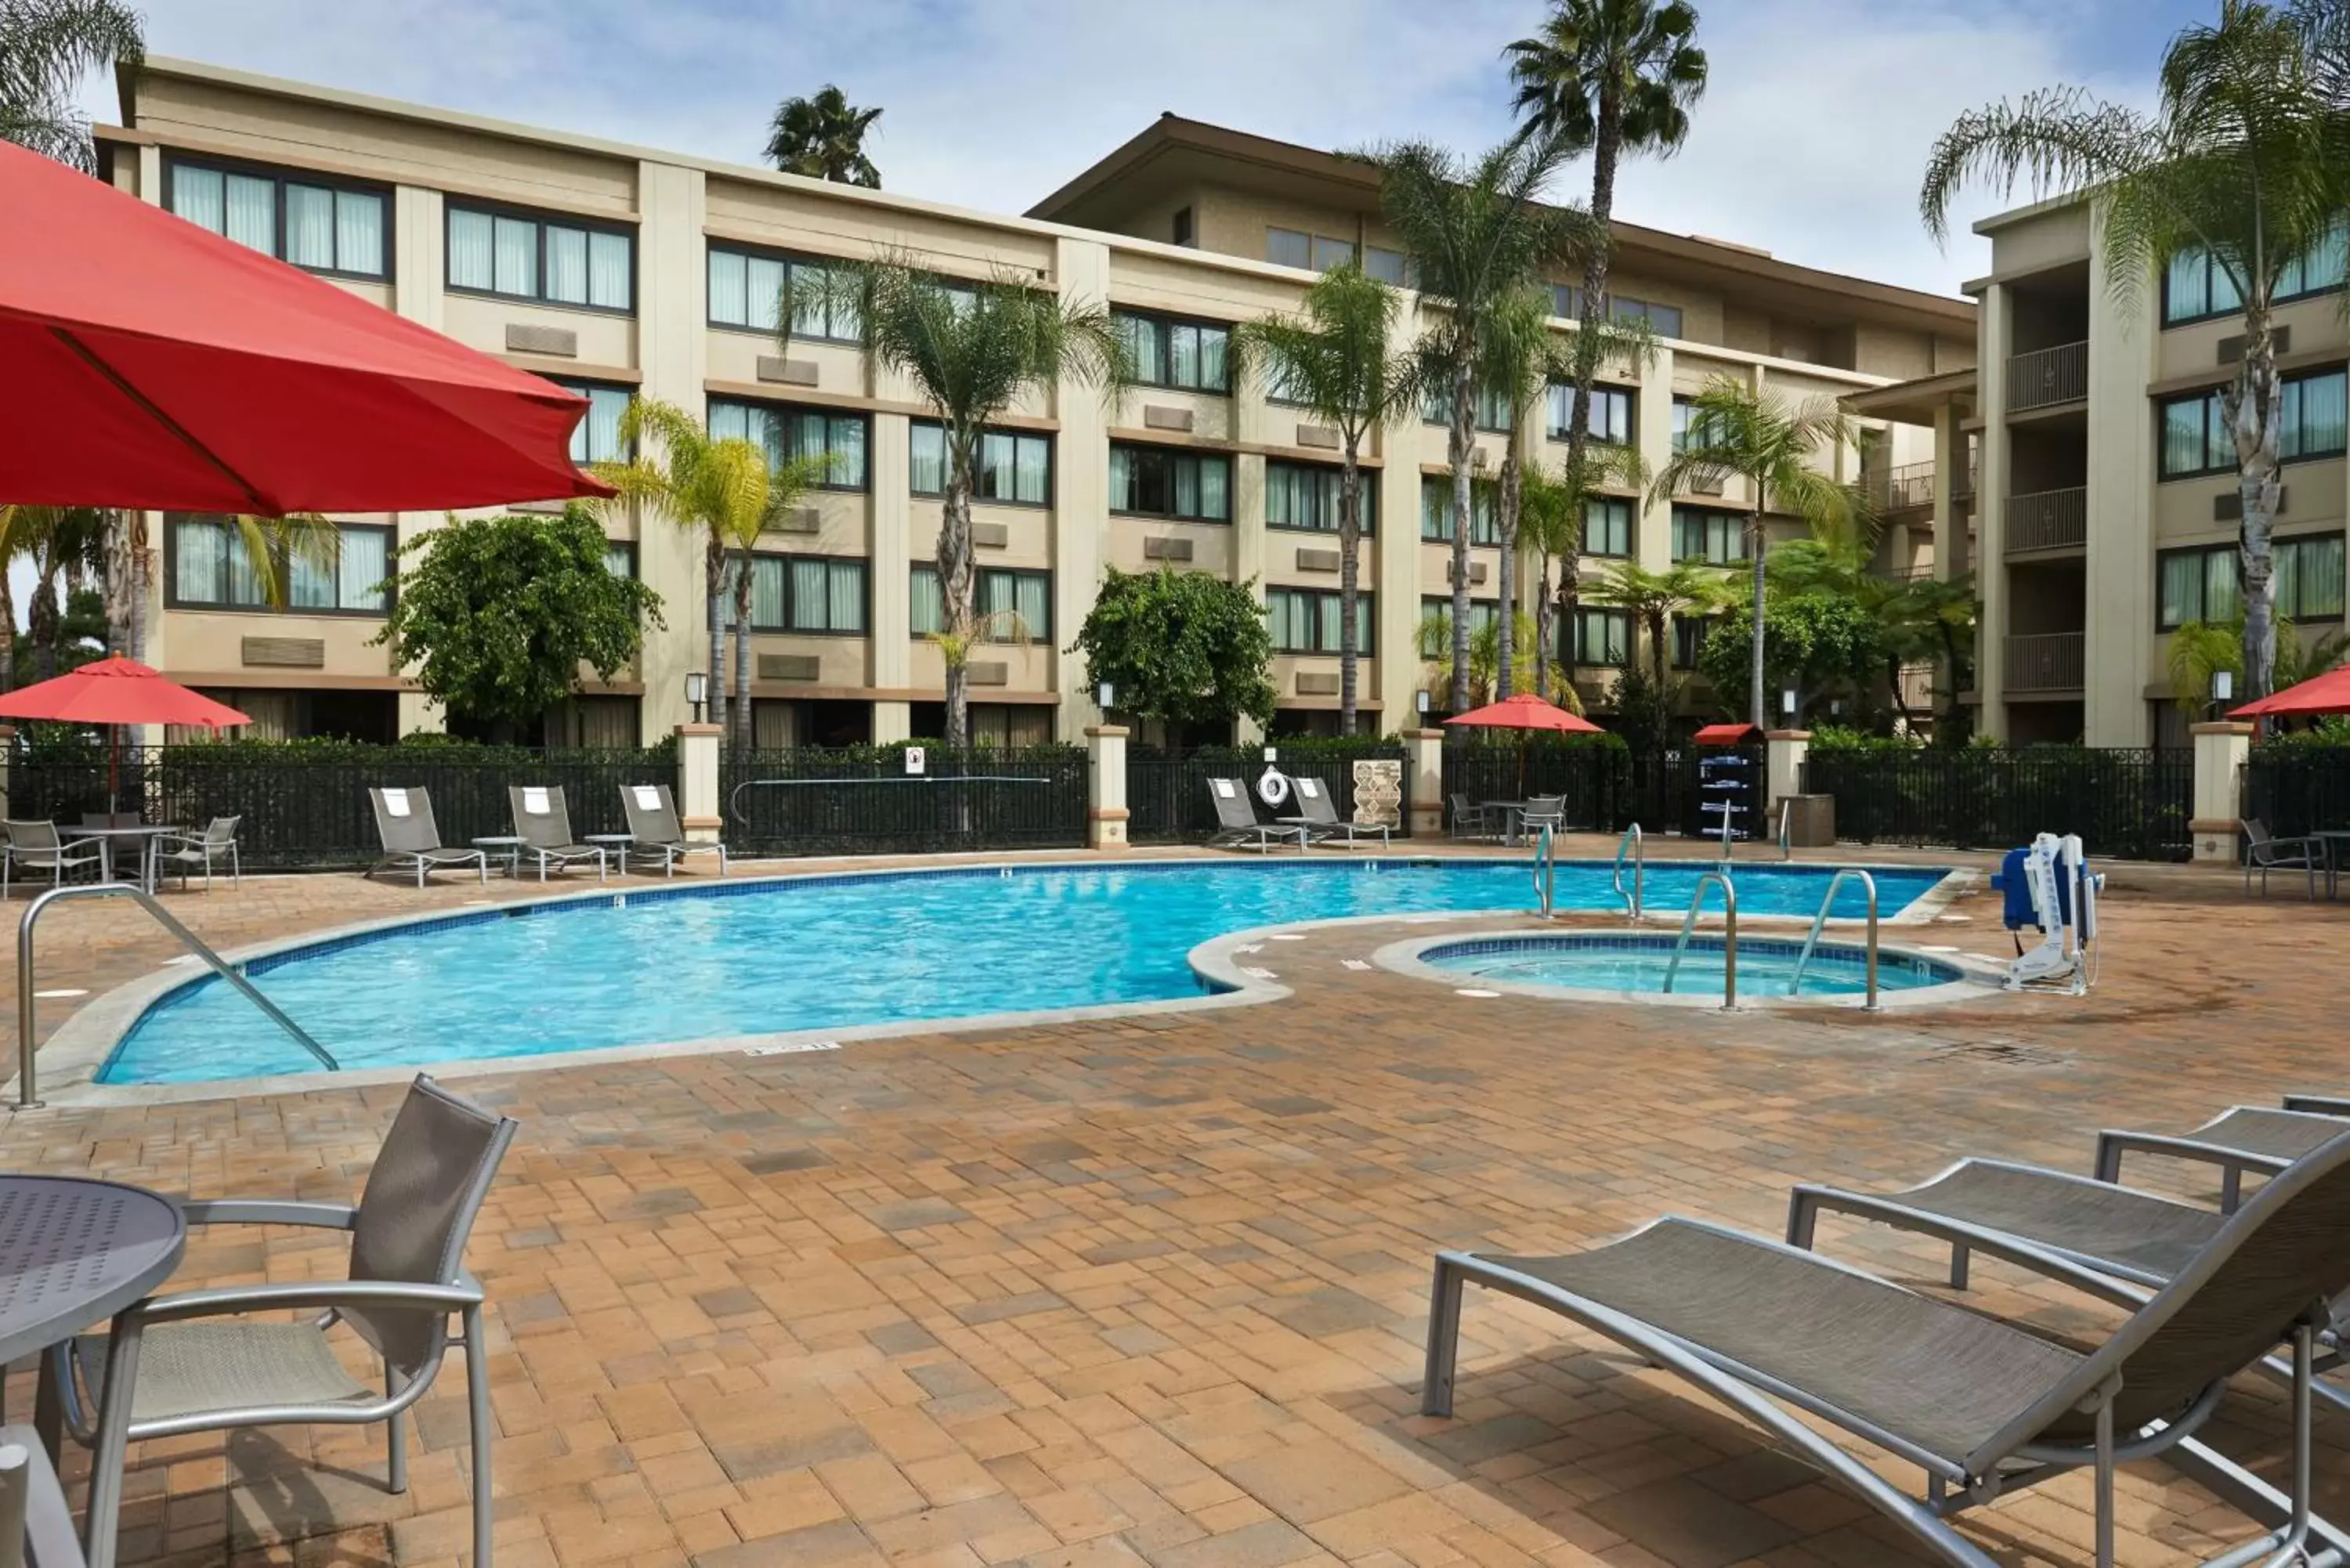 Pool view, Property Building in Doubletree by Hilton Buena Park